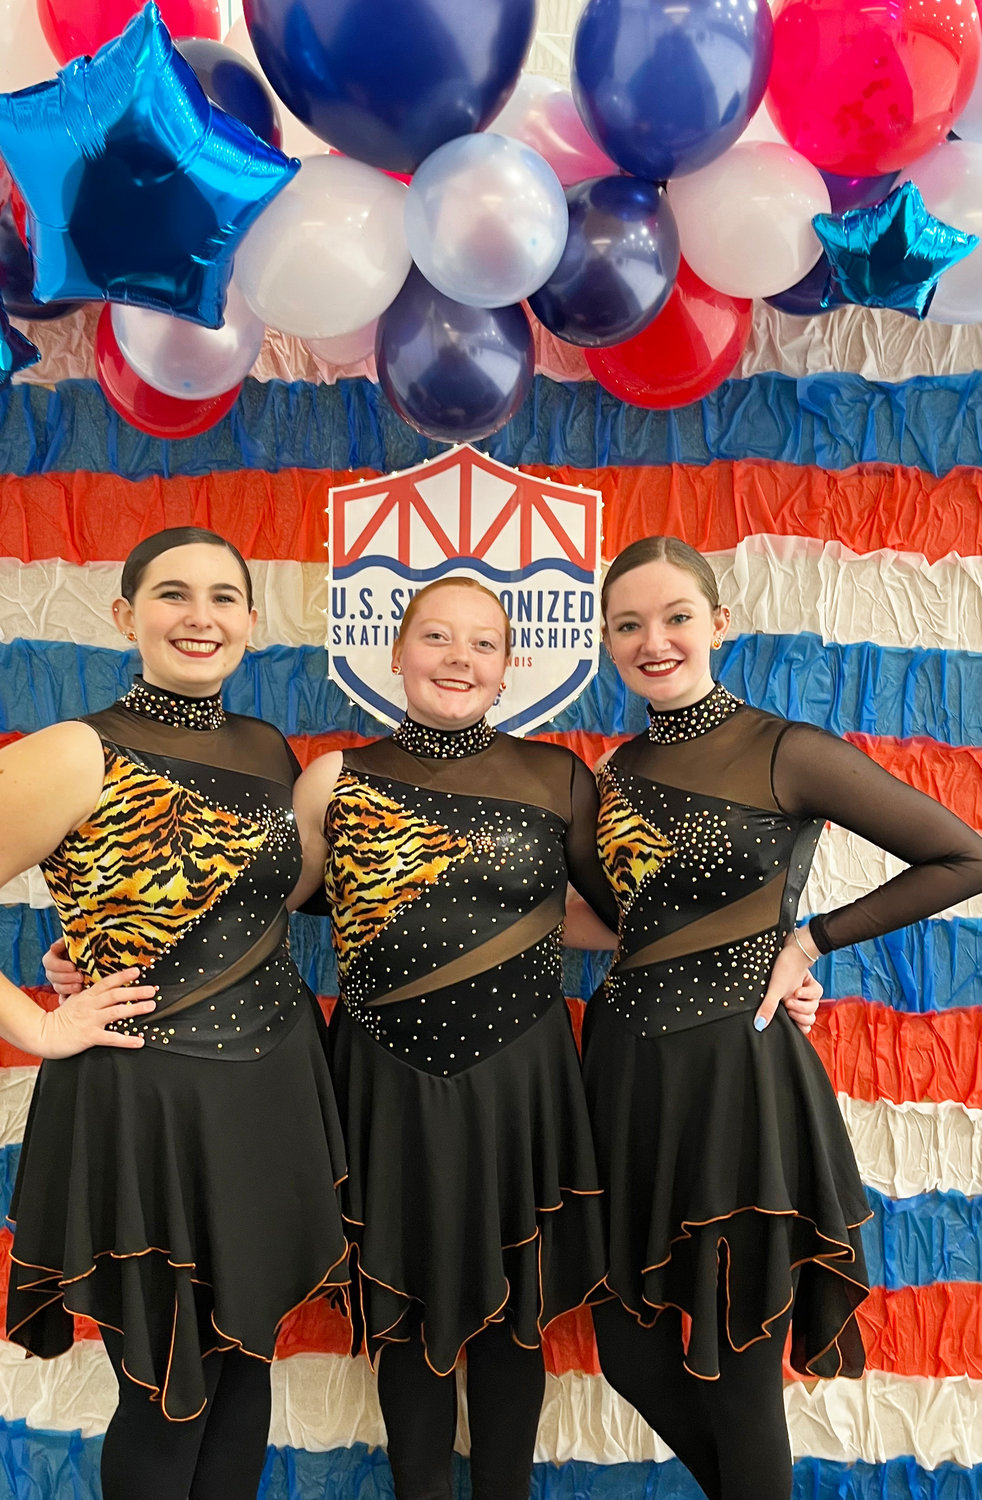 Maya Balling, center, with teammates on the Team Excel adult synchronized skating team at Nationals last week.